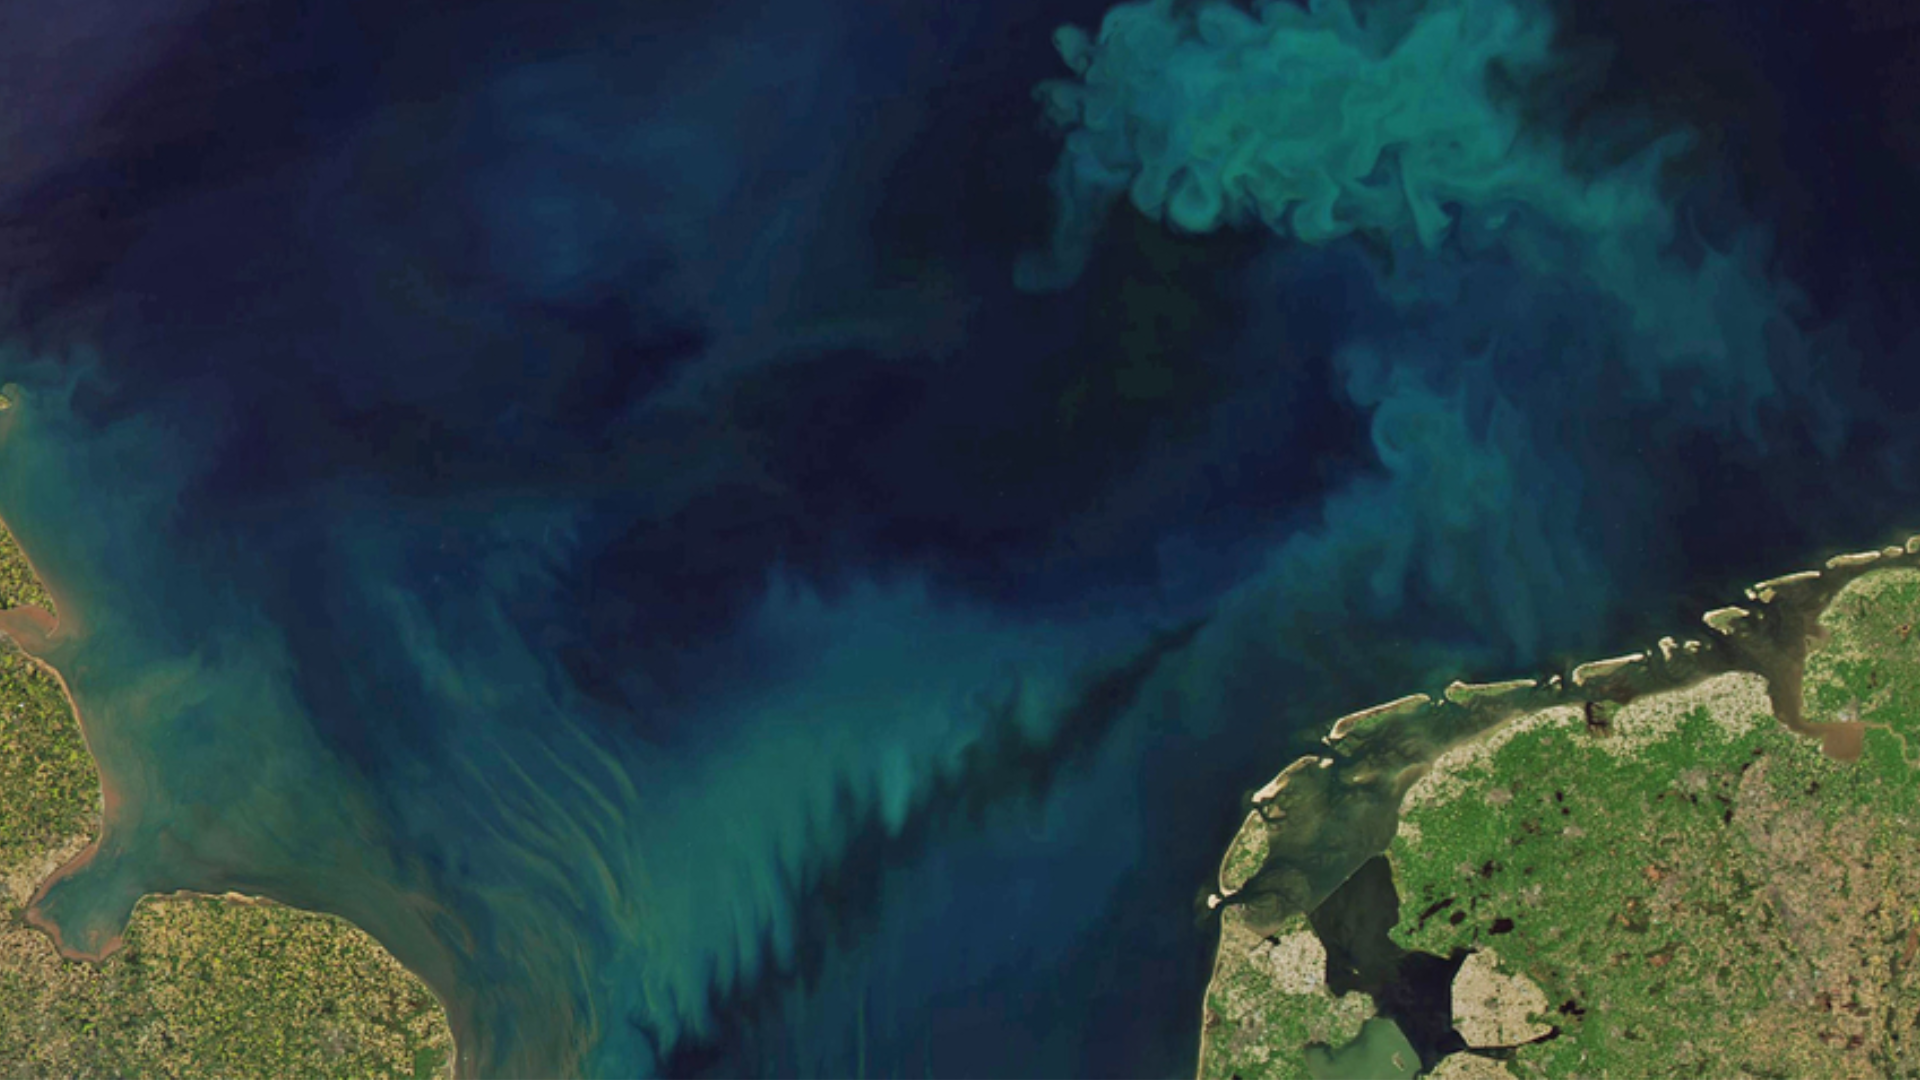 Climate change may be changing the color of Earth's oceans